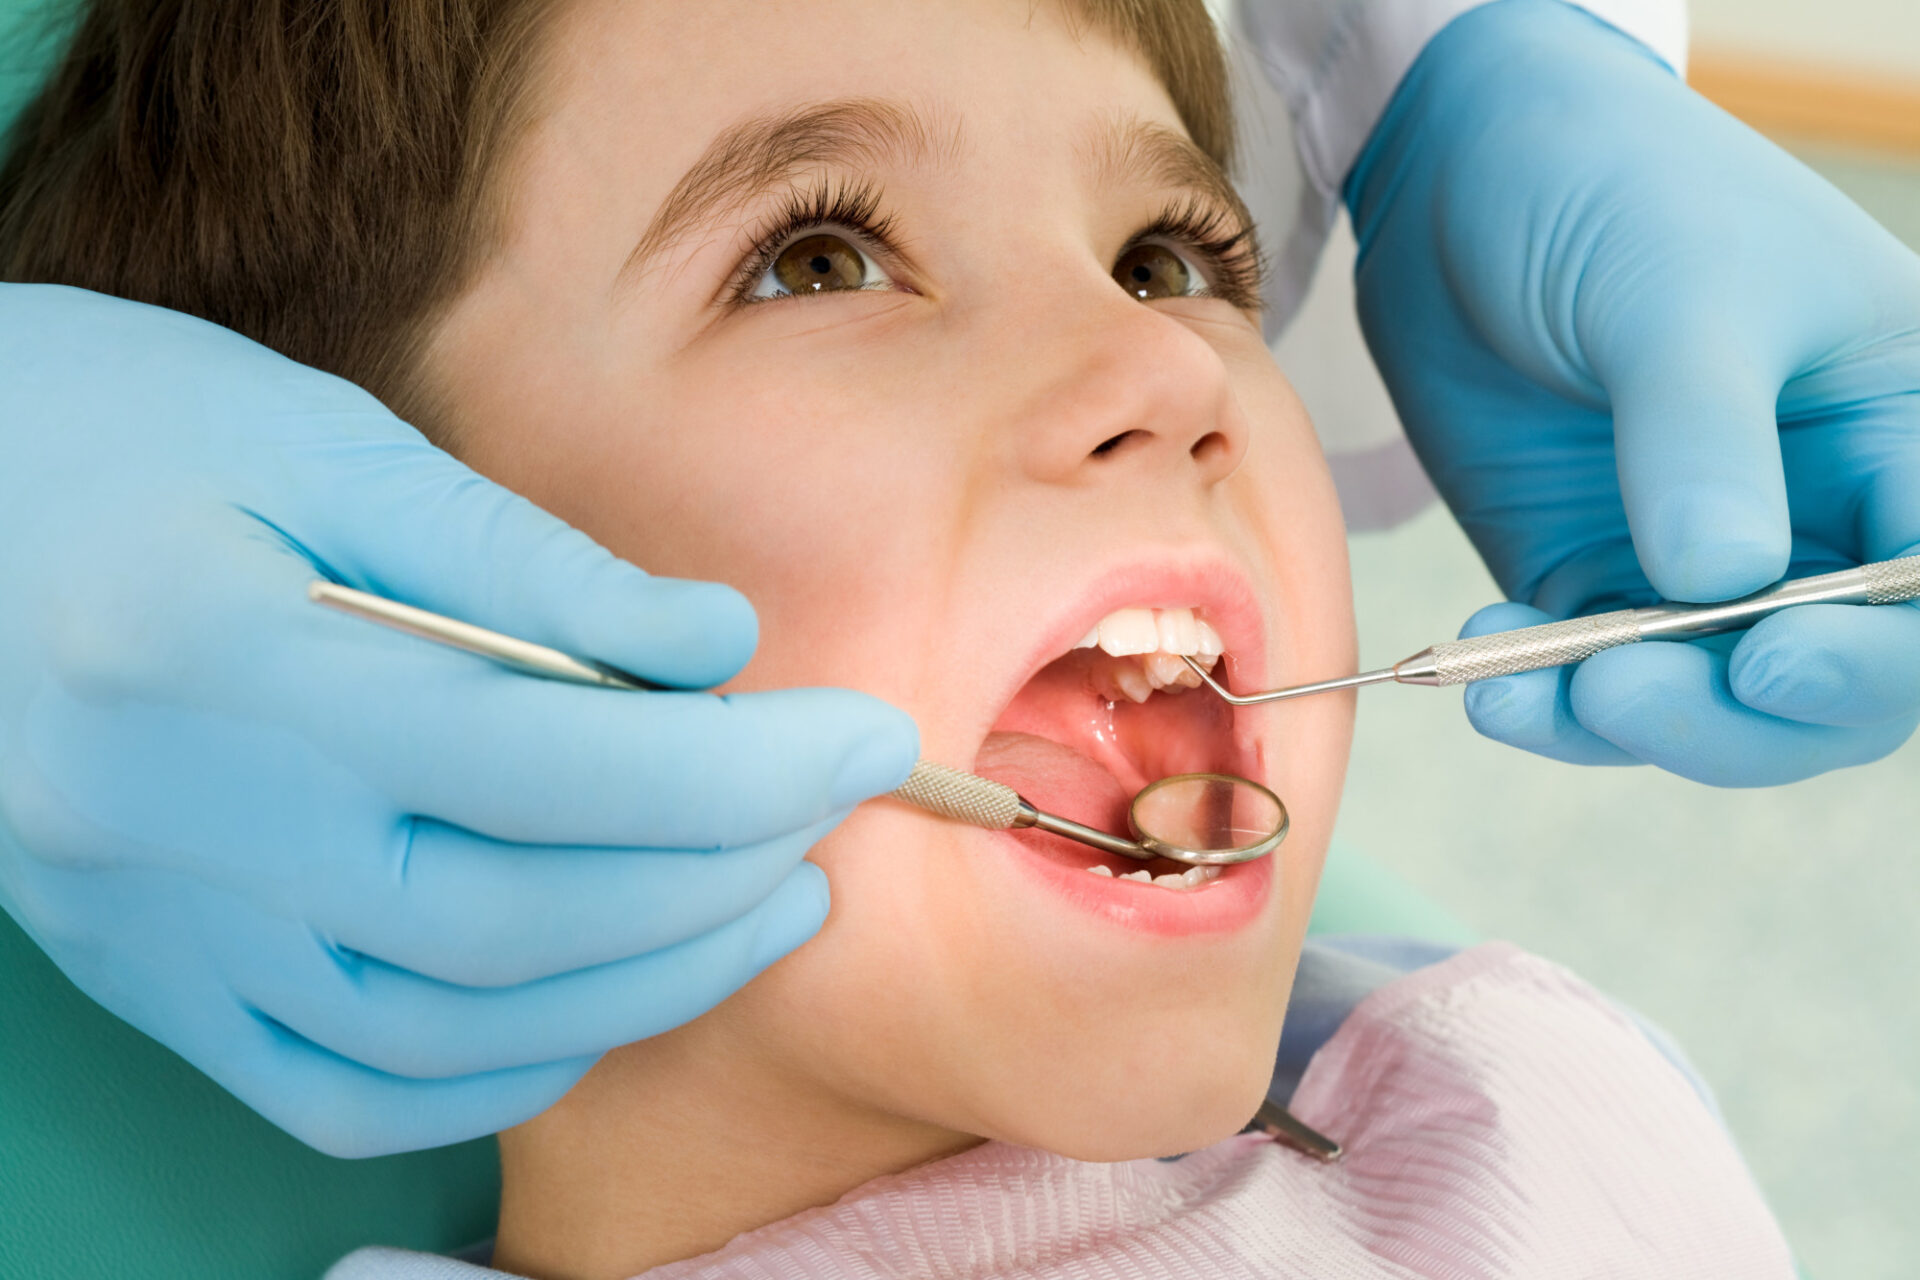 5 Symptoms Of Cavities To Look For - Park Place Kids